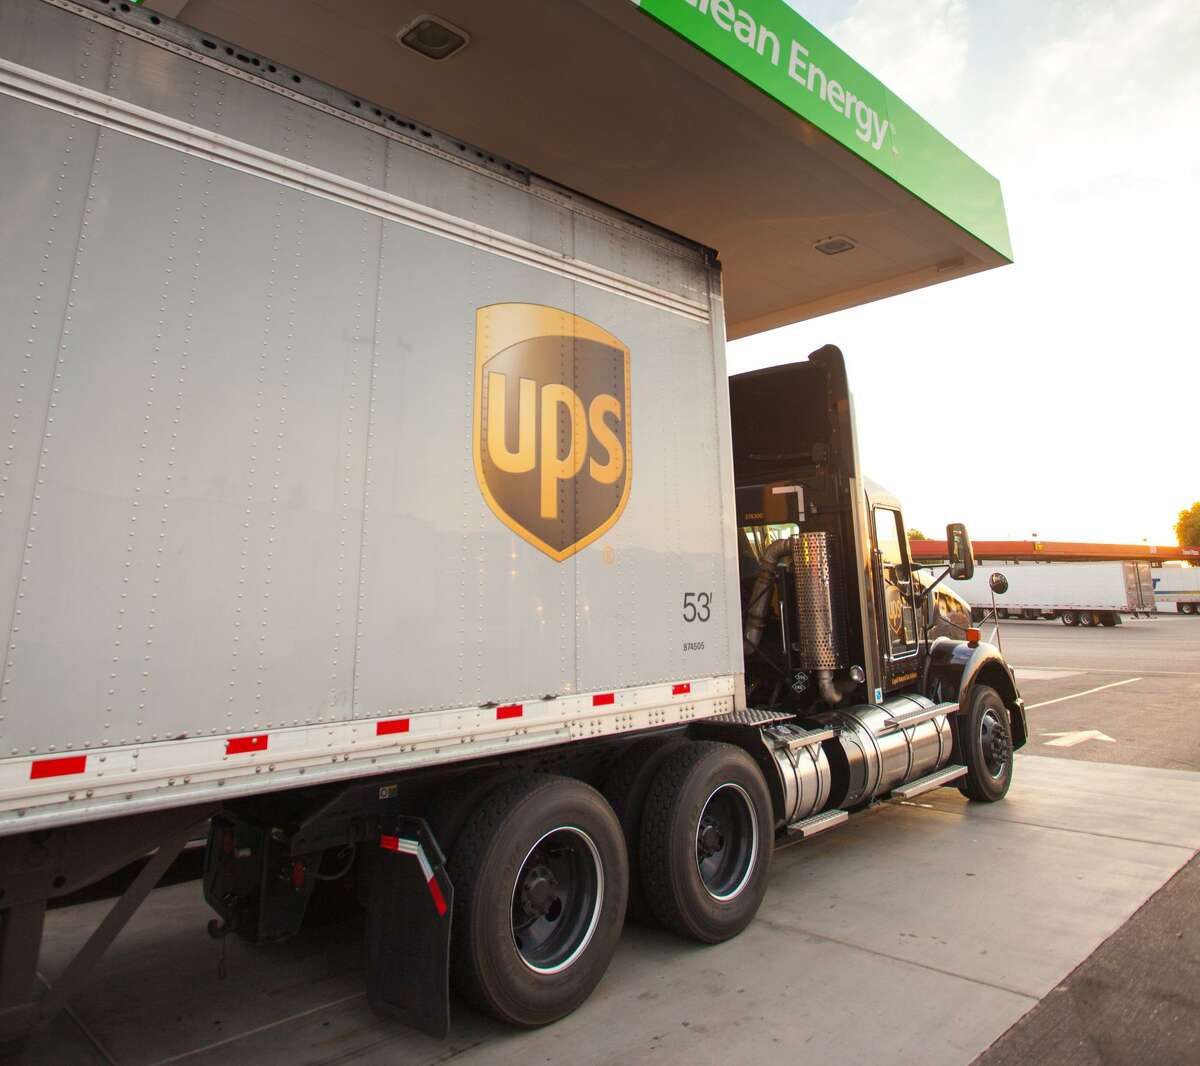 A UPS truck fills up at a Clean Energy Fuels liquefied natural gas fueling station in Phoenix in October 2013. (Scott Sporleder)